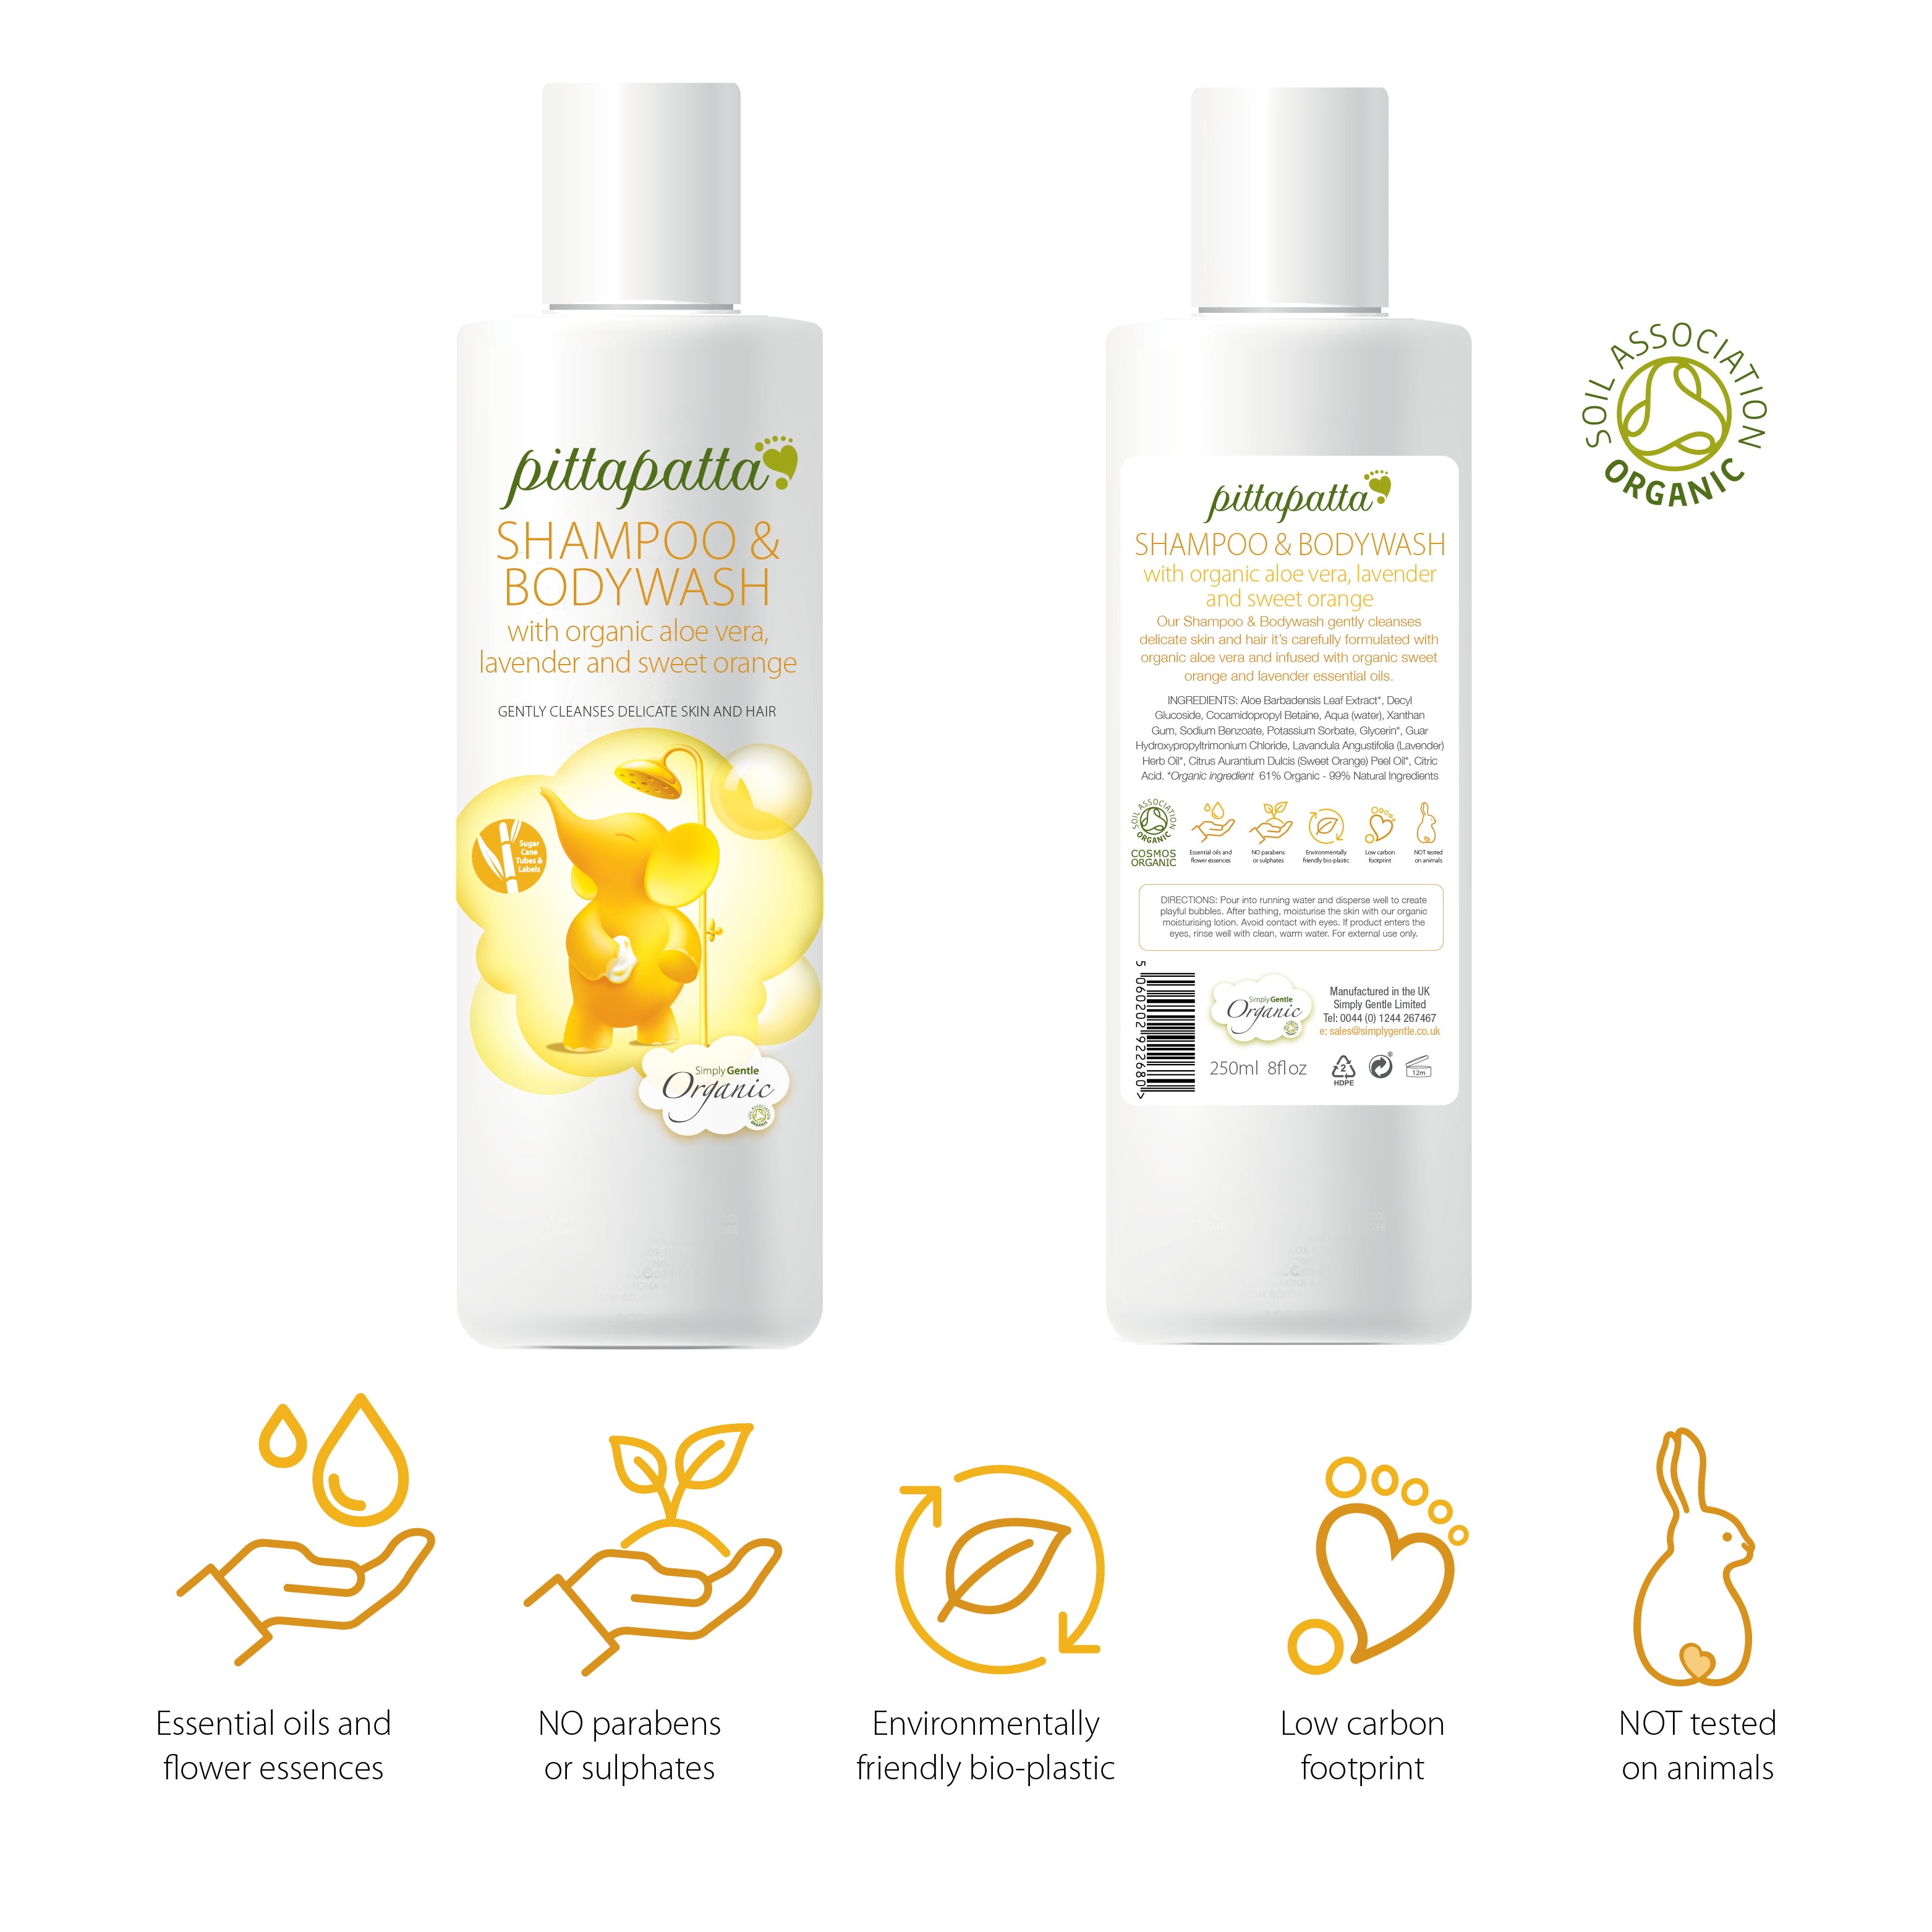 Pittapatta Shampoo & Bodywash with organic aloe vera, lavender & sweet orange, gently cleanses delicate skin and hair. From the Simply Gentle Organic bodycare range 